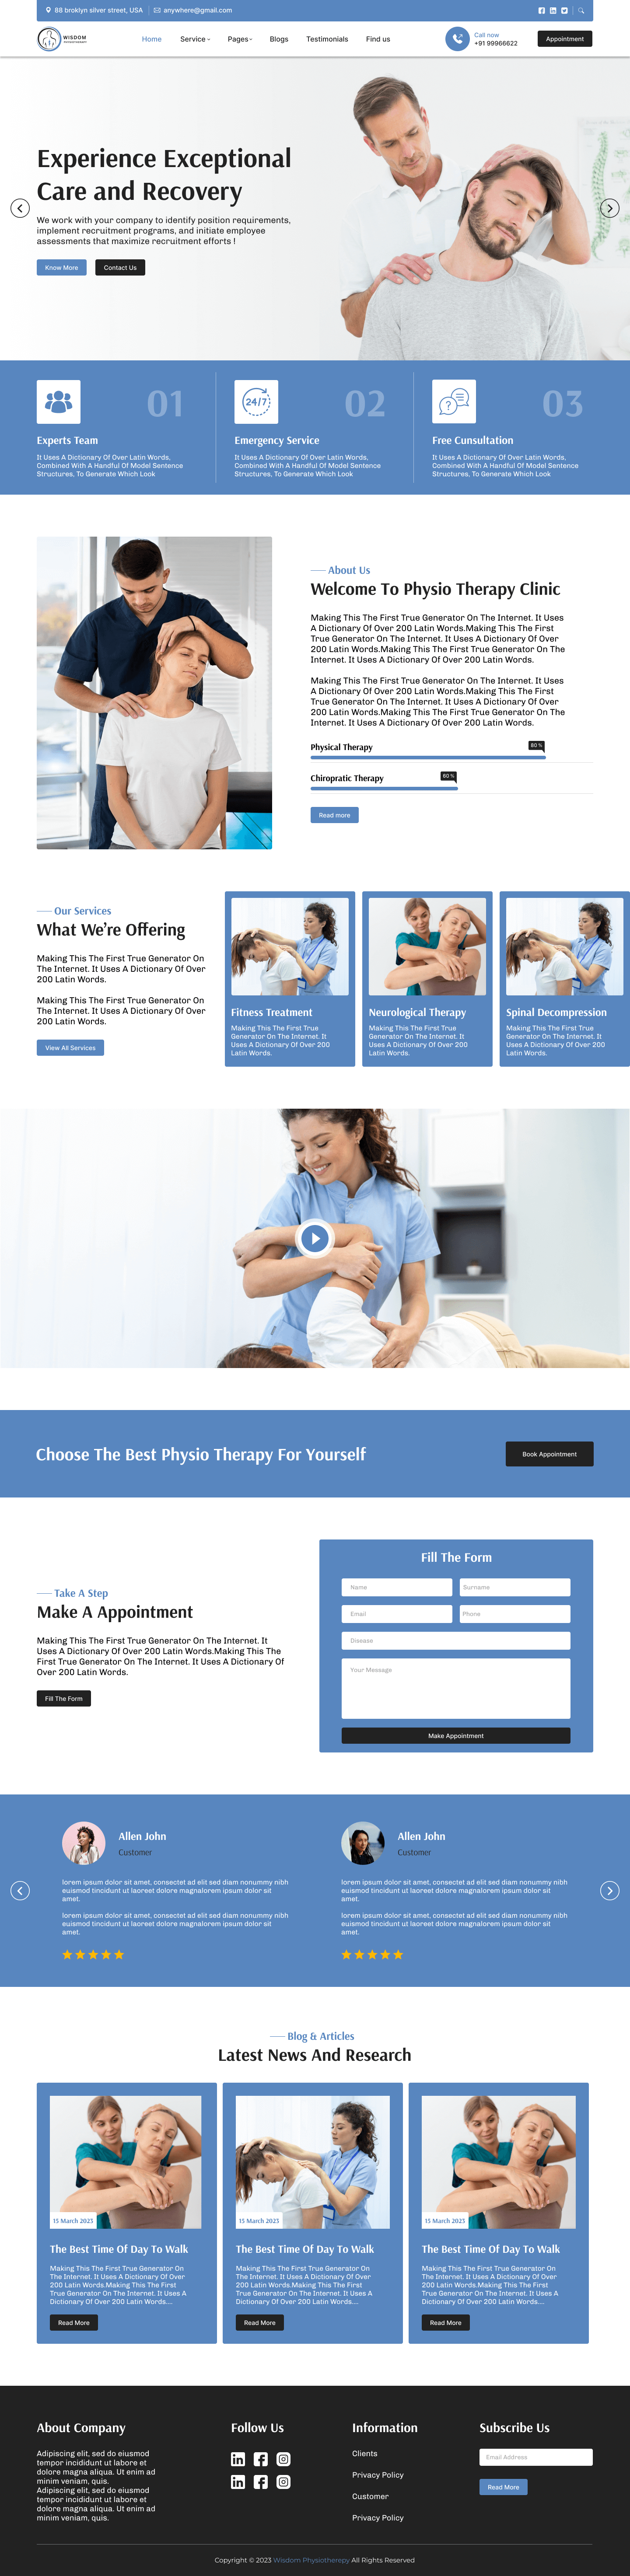 rweb physiotherapy website demo